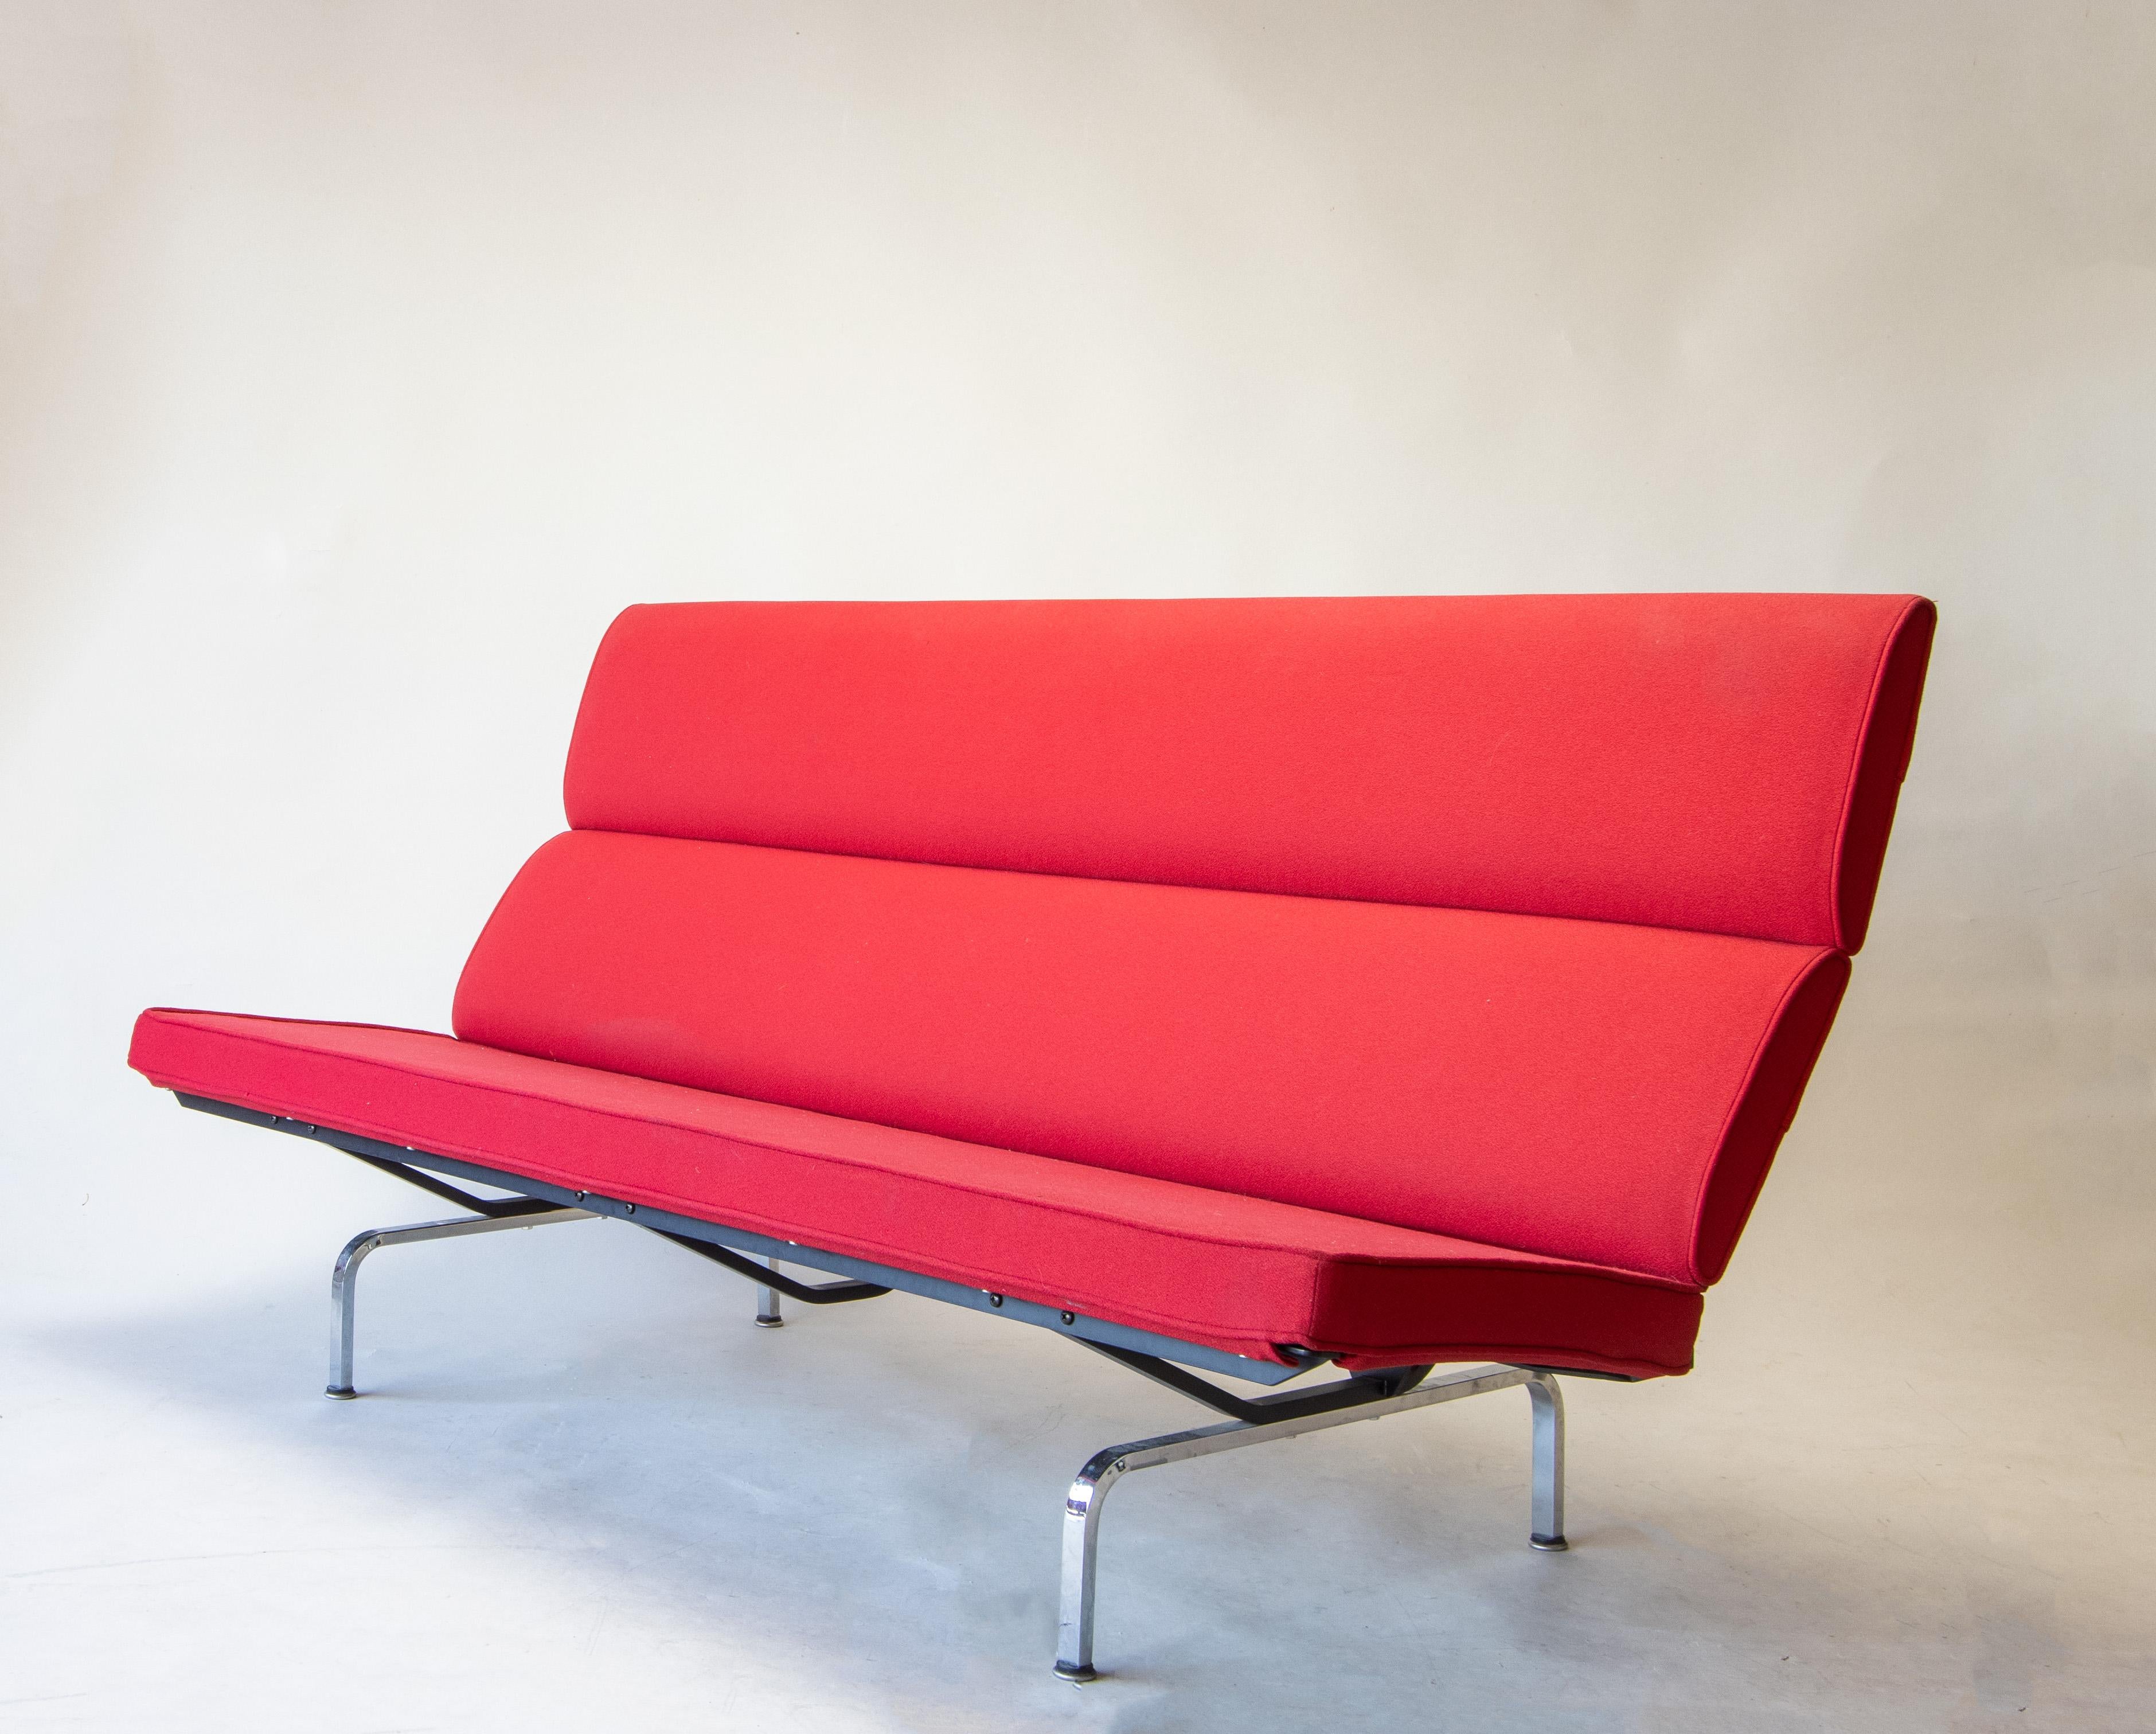 Designed by Charles and Ray Eames in 1954, this iconic design has been in continuous production, with this example executed late 2008. Used minimally in a waiting room, this piece is like new and ready for many more years of use. The design, which